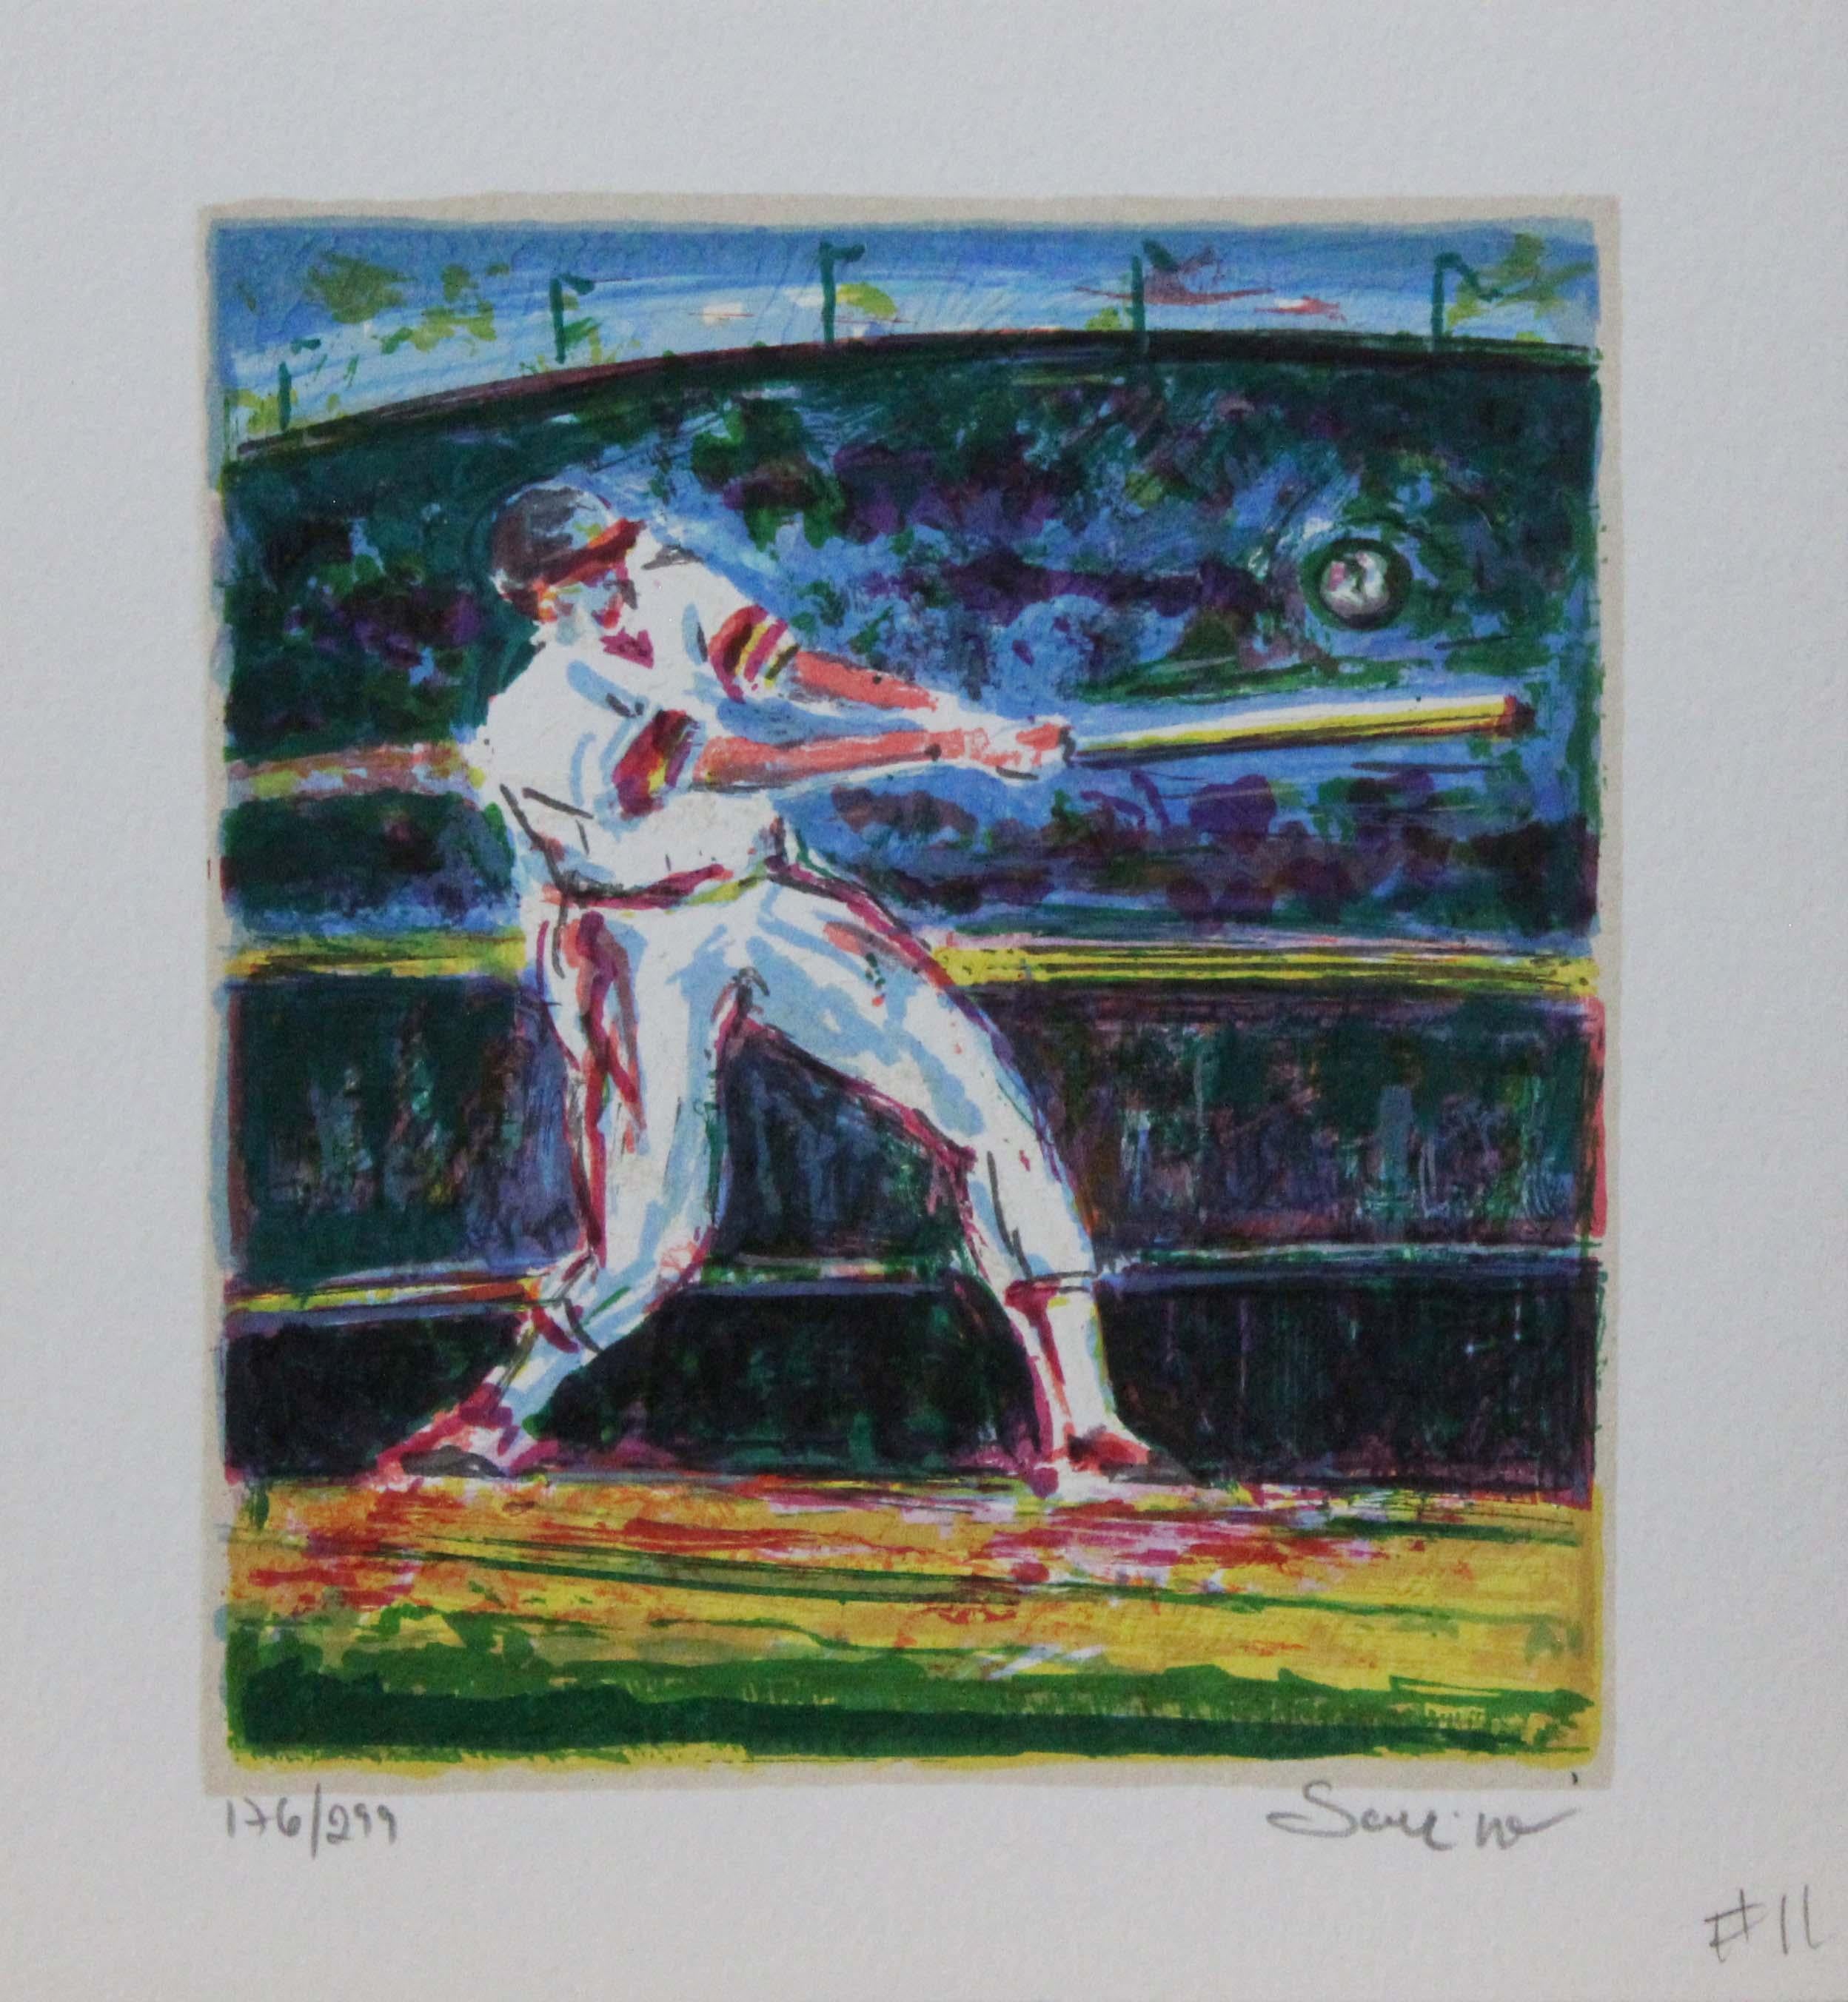 Savino Portrait Print - "Title Unknown" Baseball-themed, Limited Edition Print. Pencil-signed. 